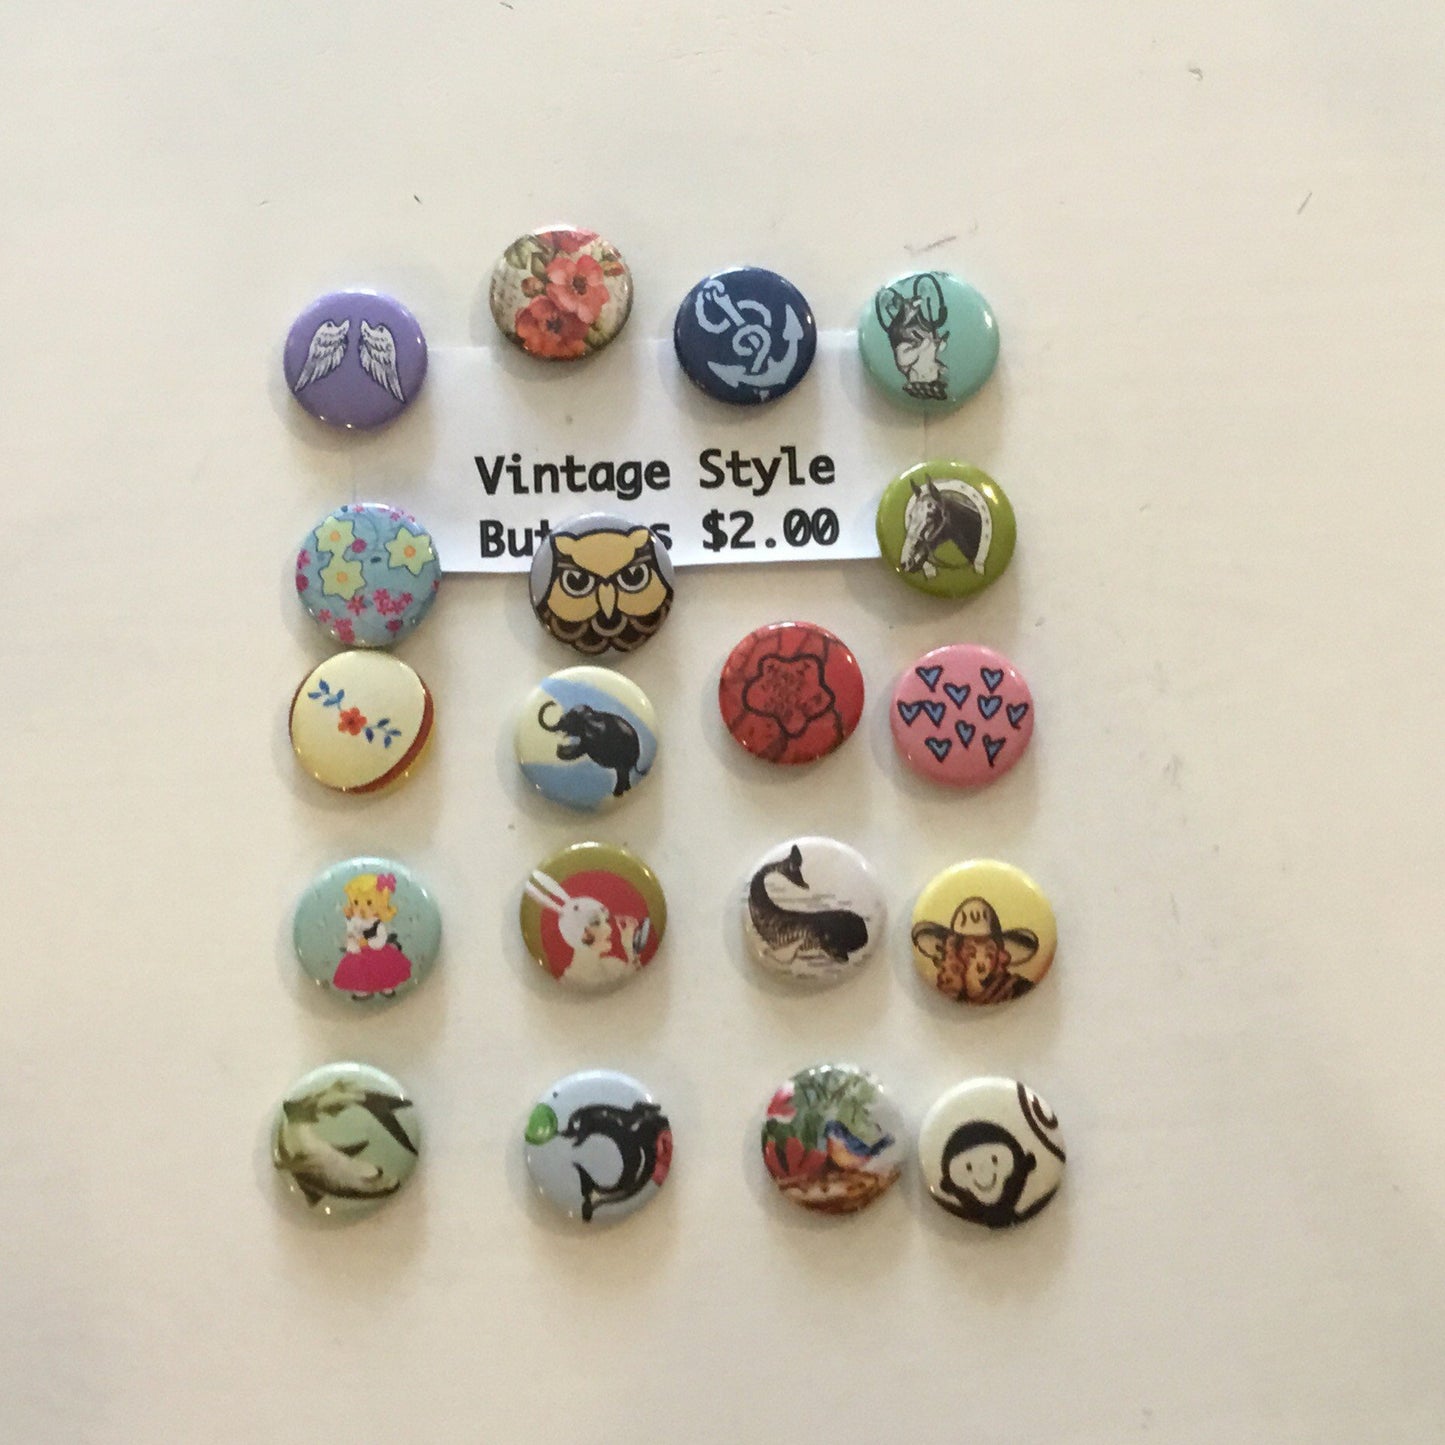 Vintage Style Buttons